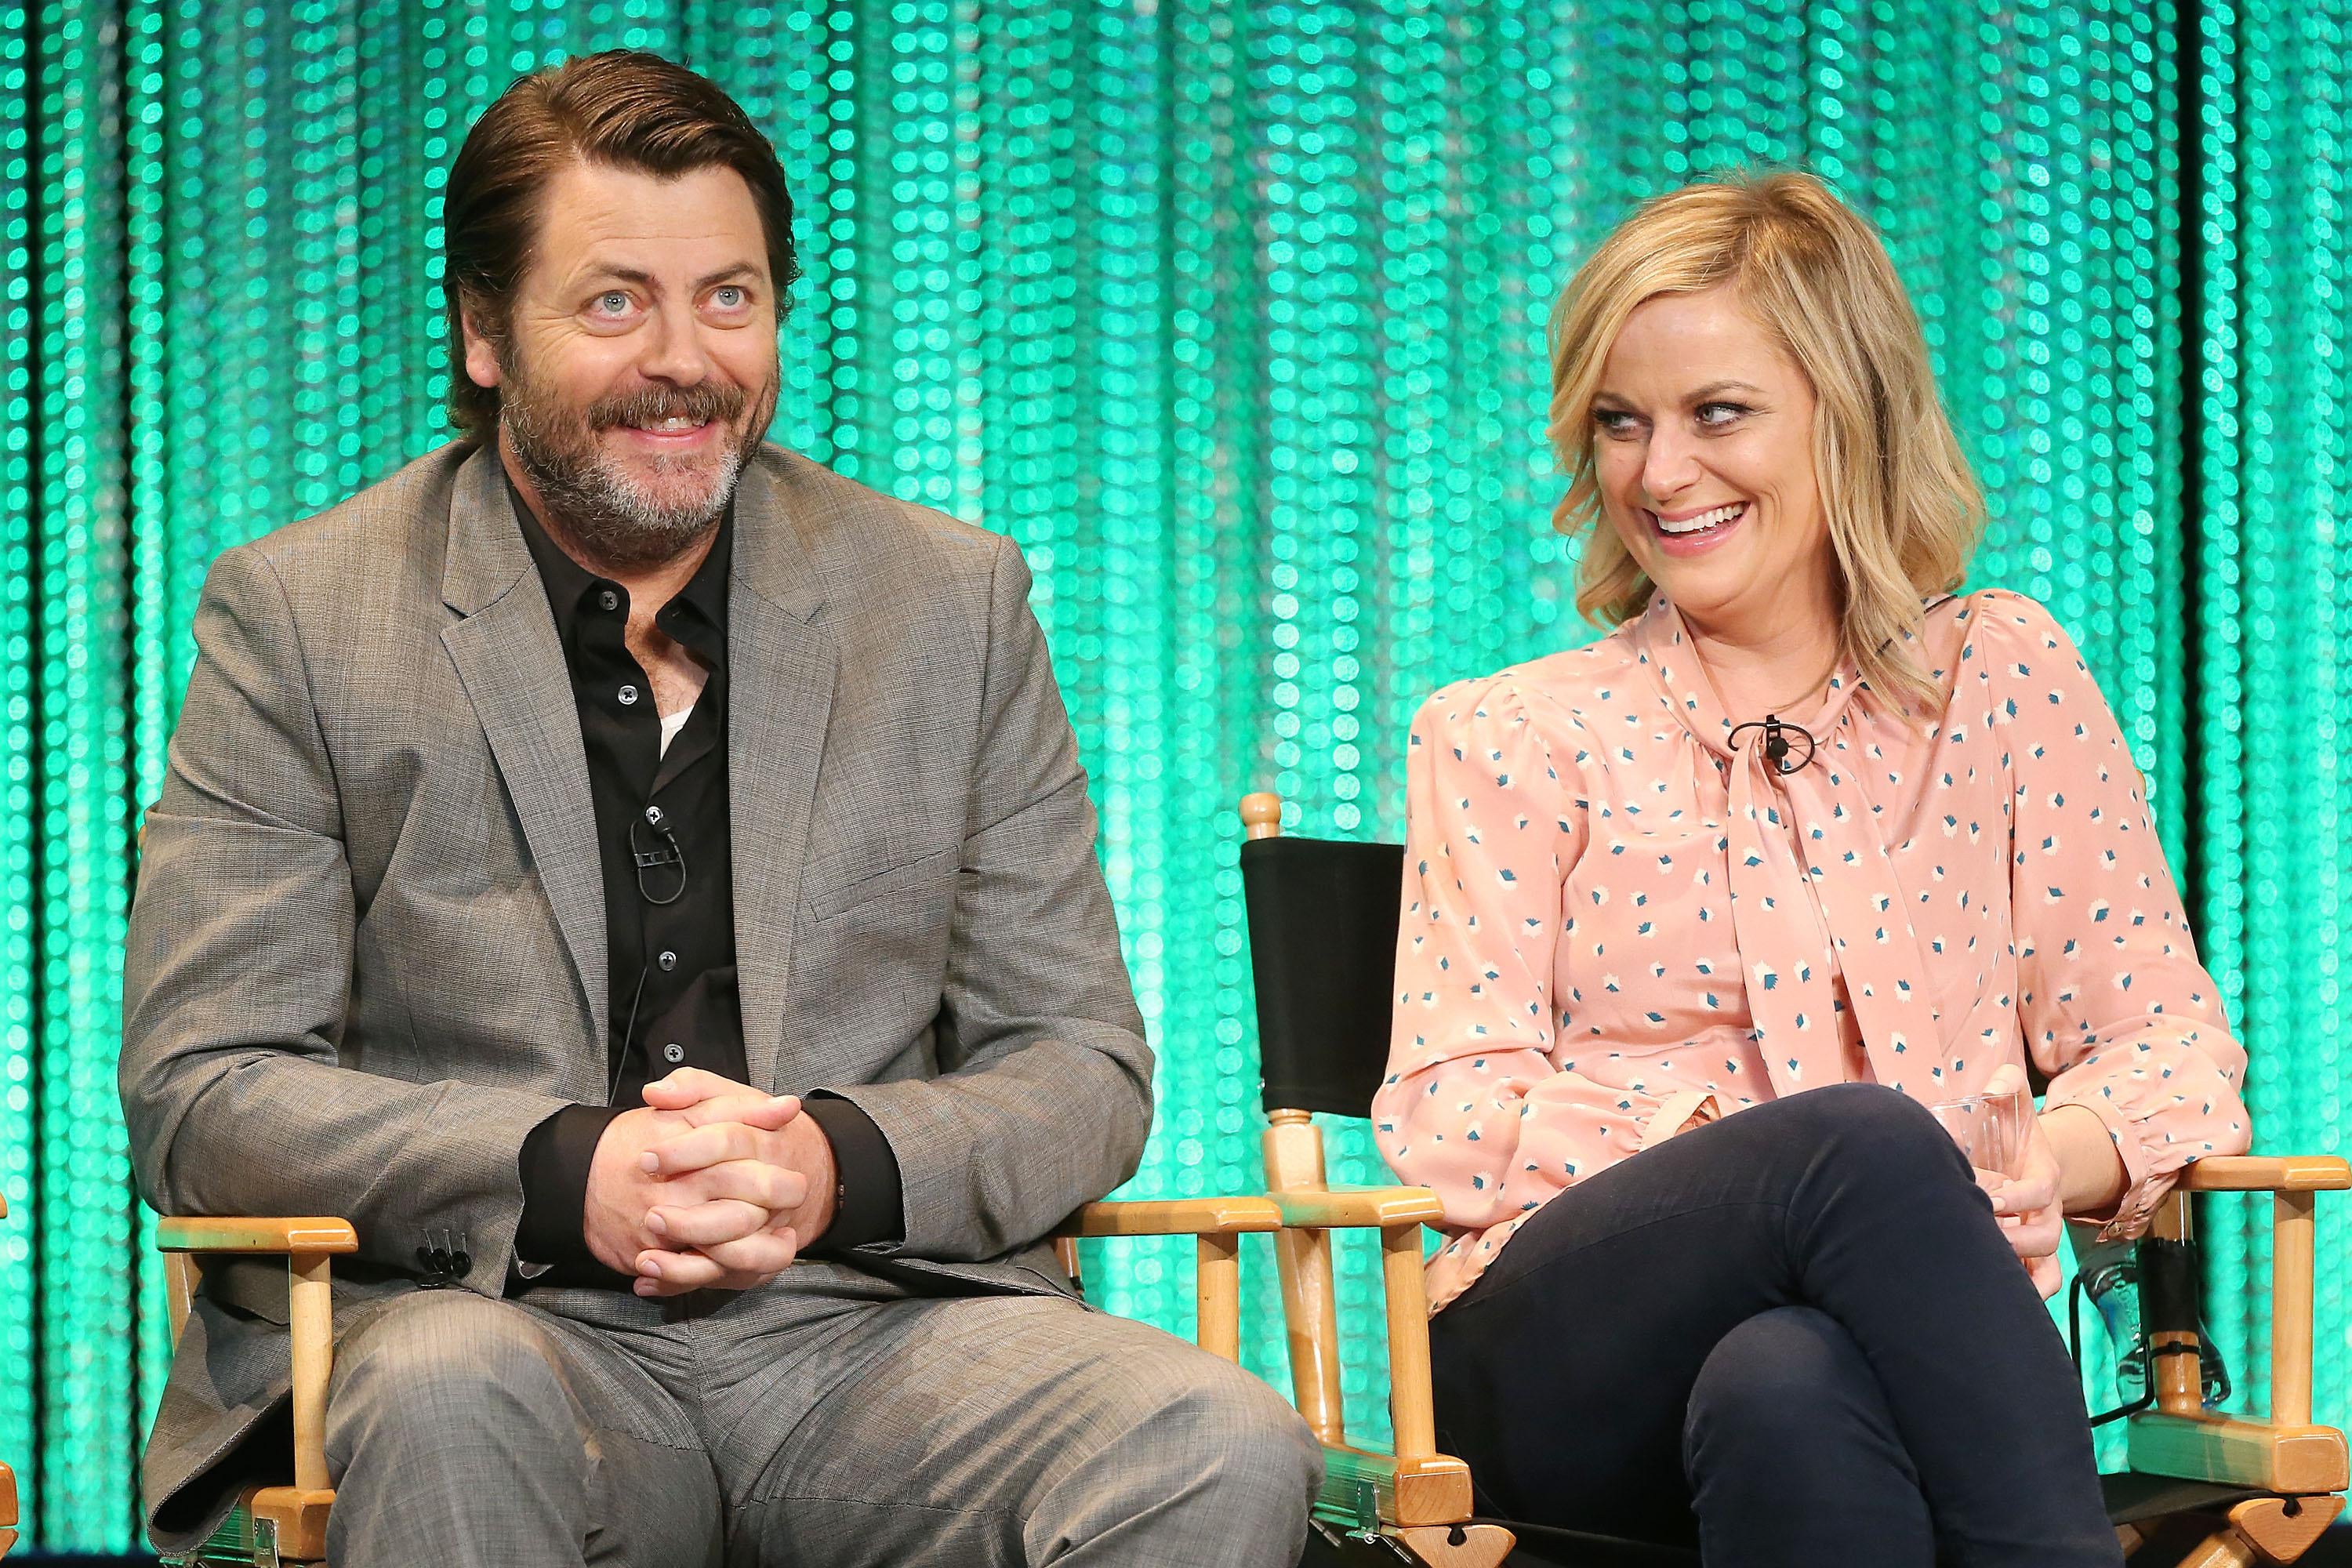 HOLLYWOOD, CA - MARCH 18: Actor Nick Offerman (L) and actress Amy Poehler speak during The Paley Center for Media's PaleyFest 2014 Honoring 'Parks and Recreation' at the Dolby Theatre on March 18, 2014 in Hollywood, California.  (Photo by Frederick M. Brown/Getty Images)